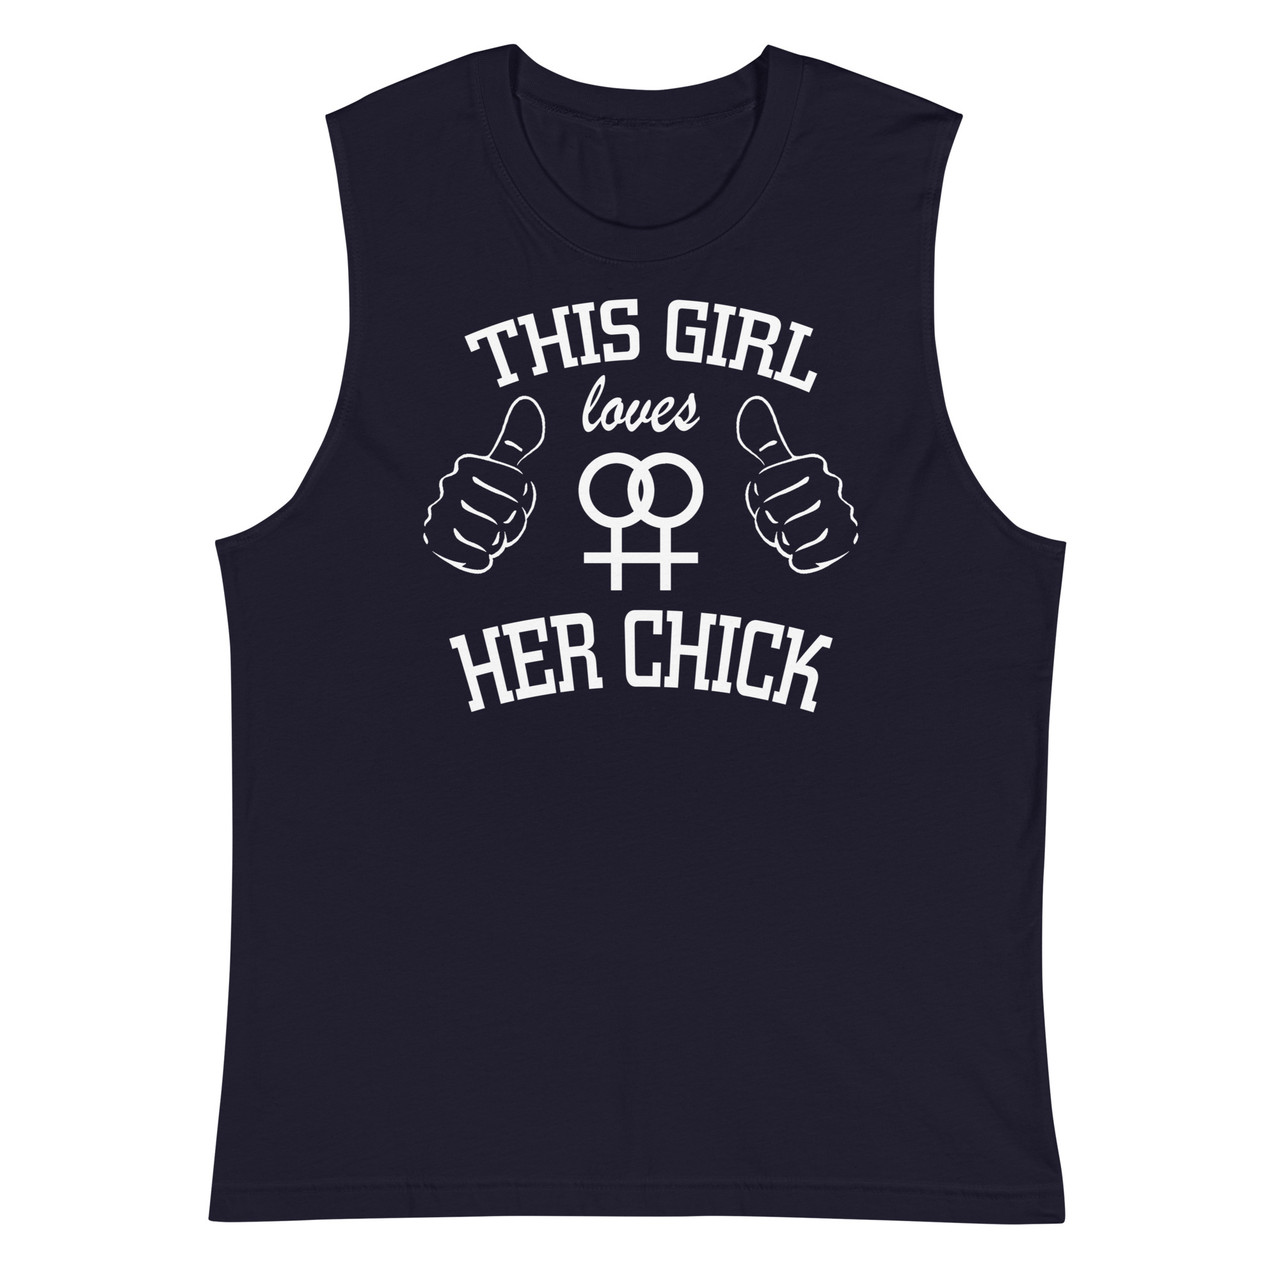 This Girl Loves Her Chick Unisex Muscle Shirt - Bella + Canvas 3483 